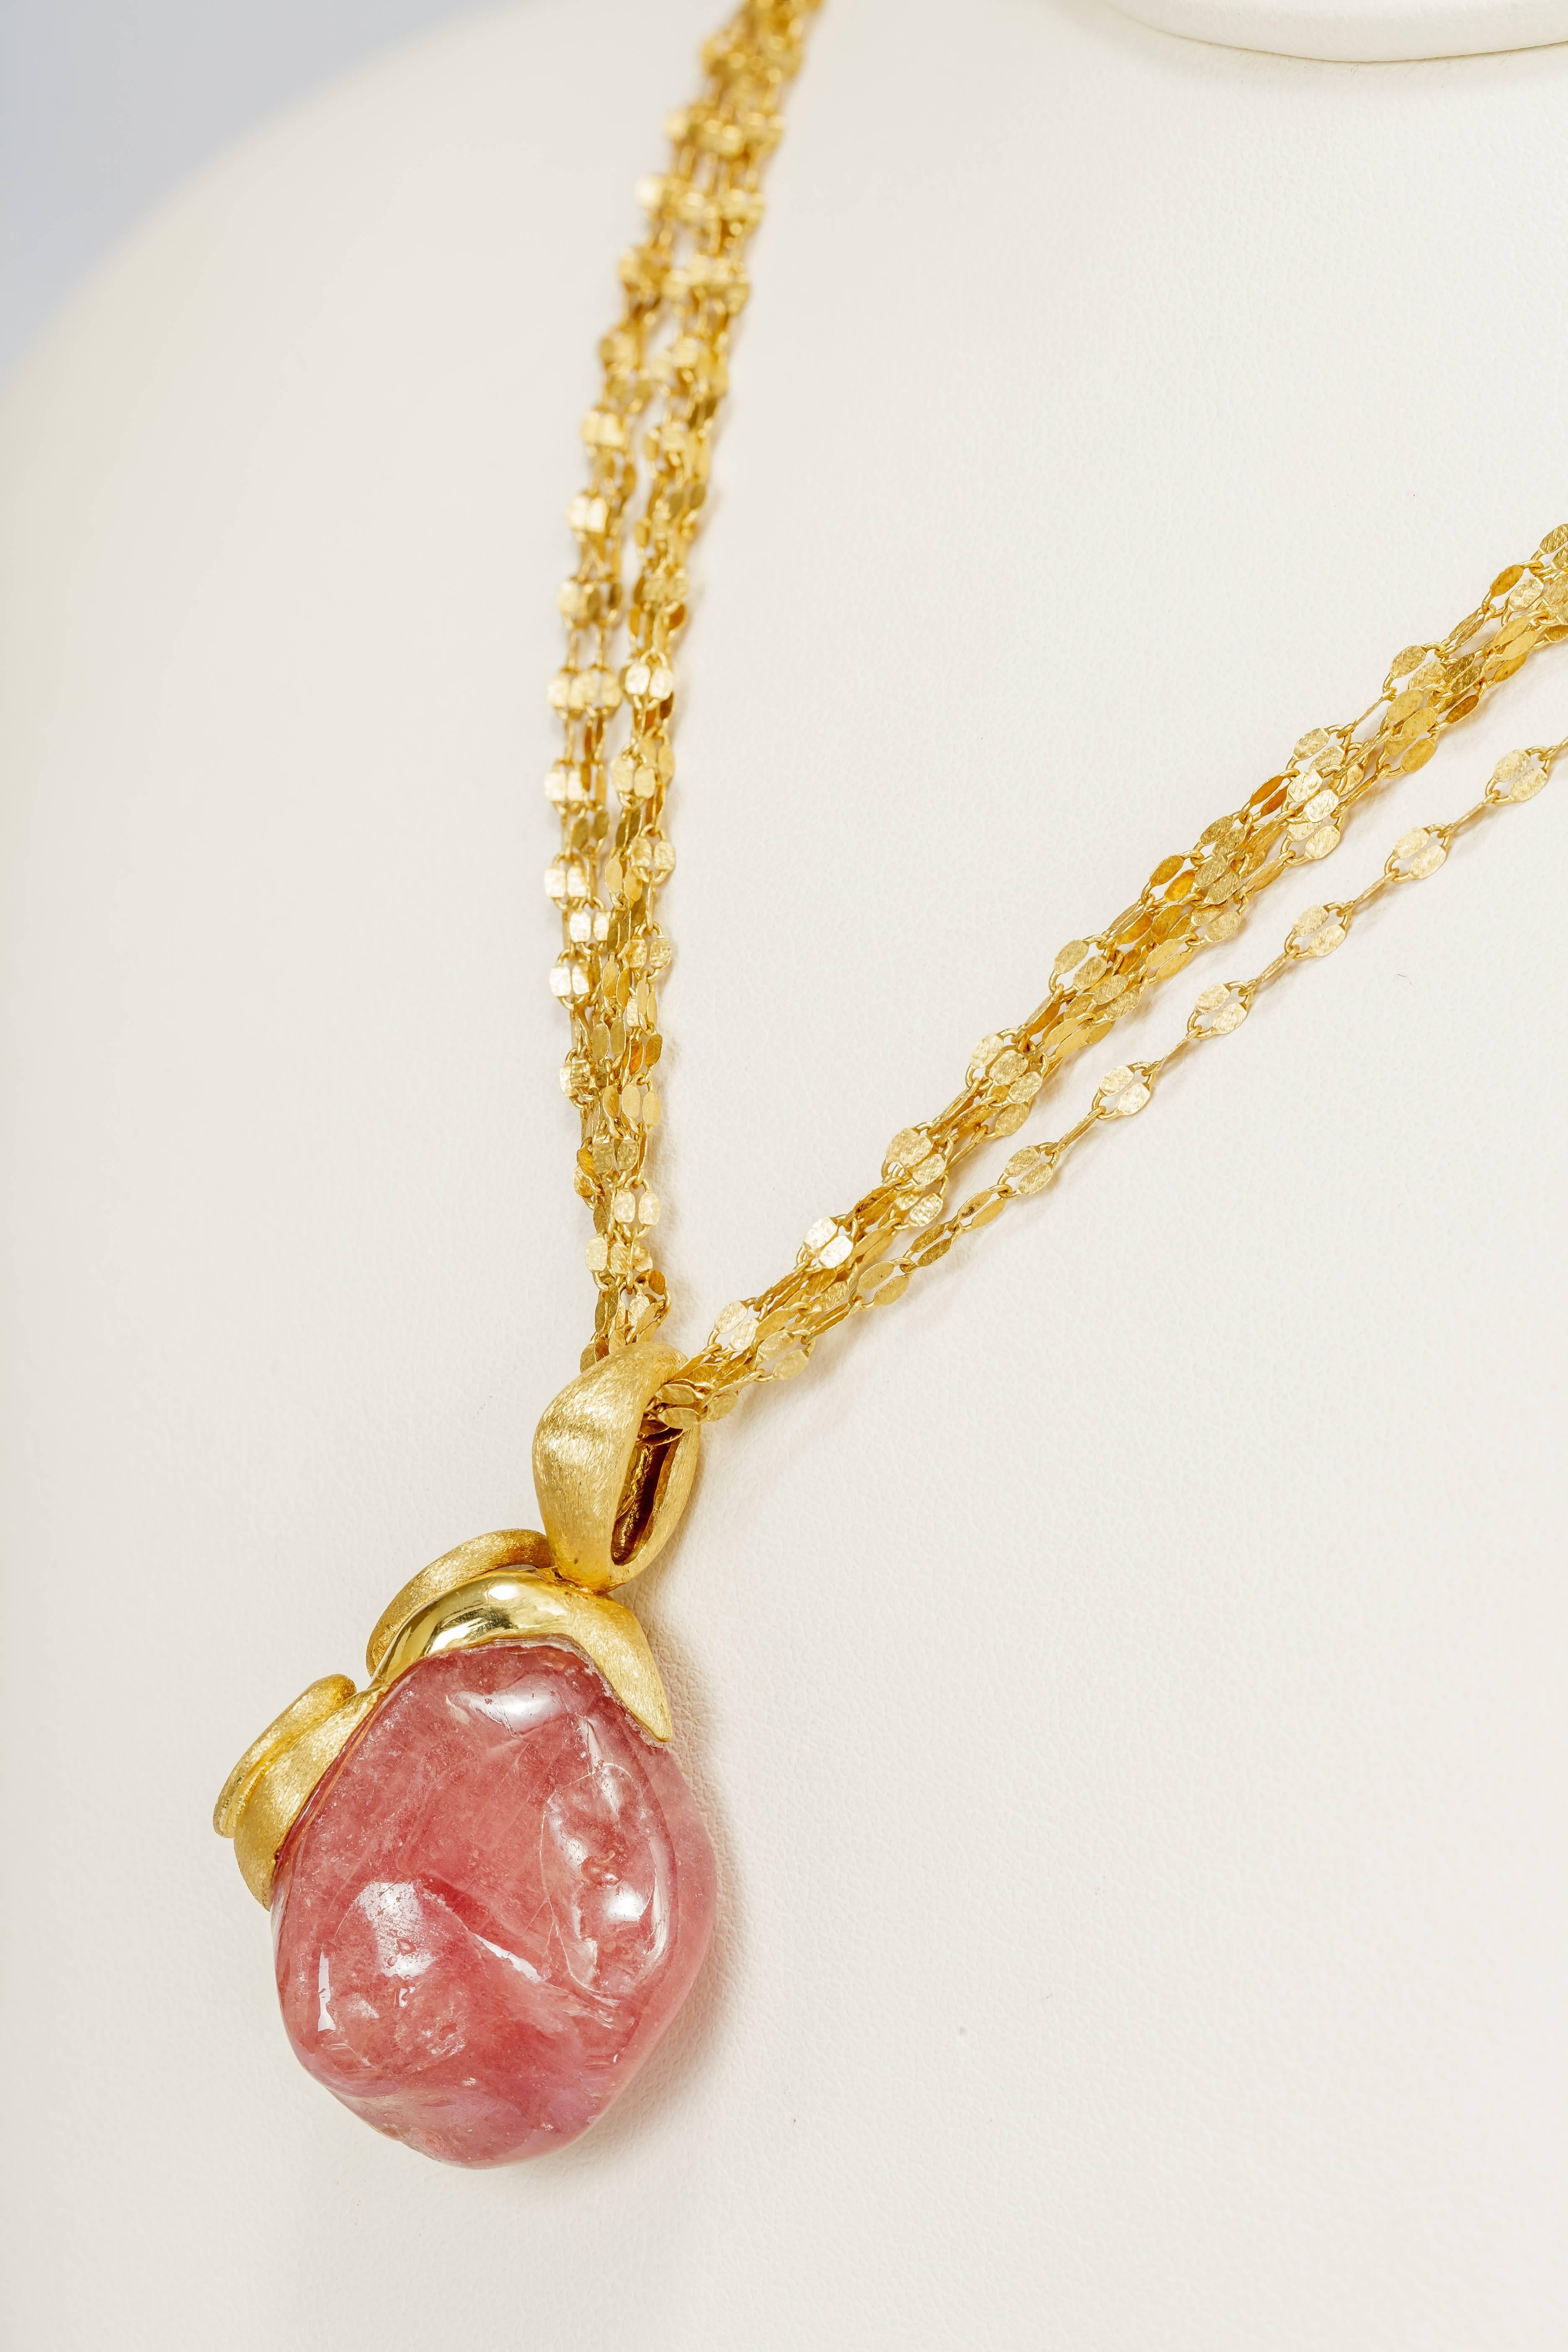 Yvel Pendant Necklace Natural Reddish Pink Sapphire 18k Yellow Gold 90.0 ct. In New Condition For Sale In Houston, TX